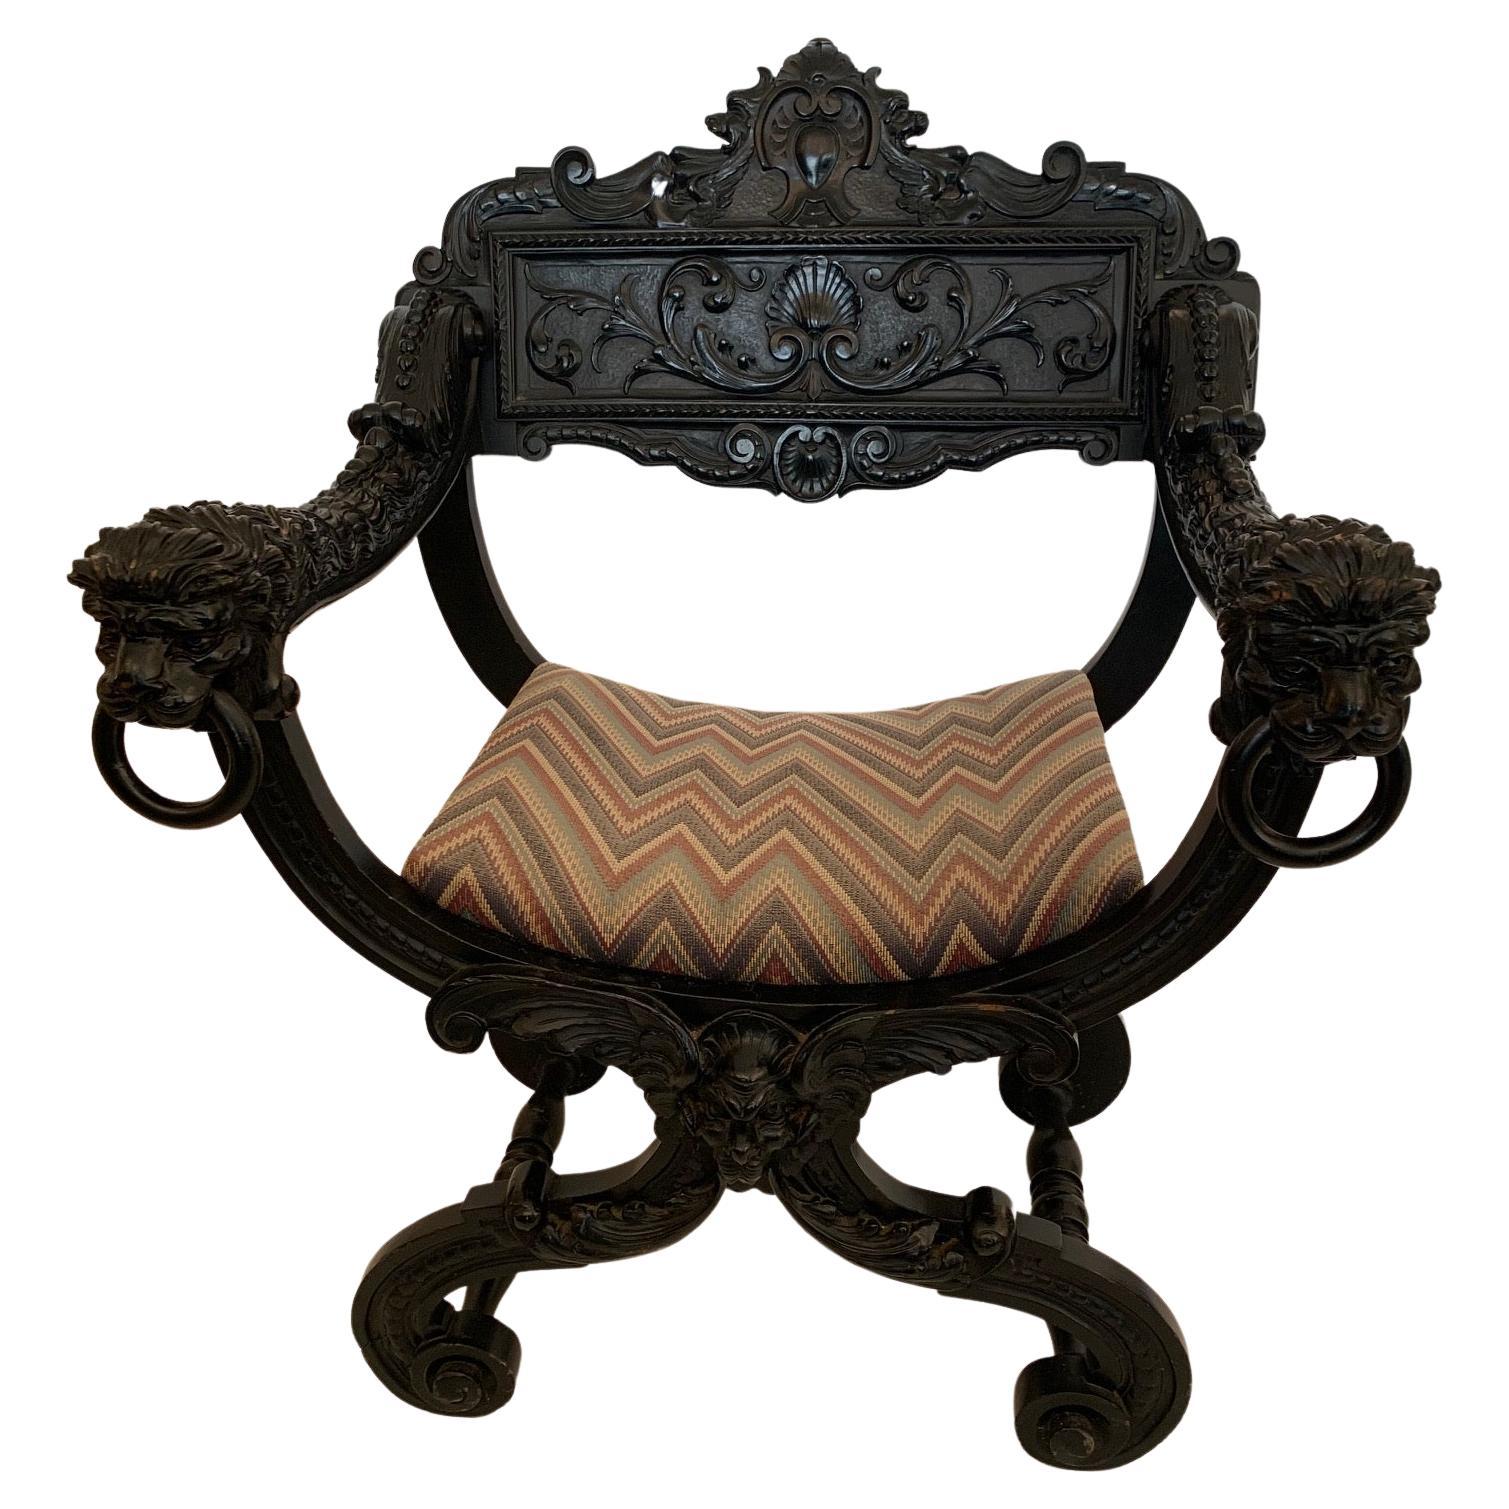 Stunning Antique Carved Wood Ebonized Throne Style Desk Chair